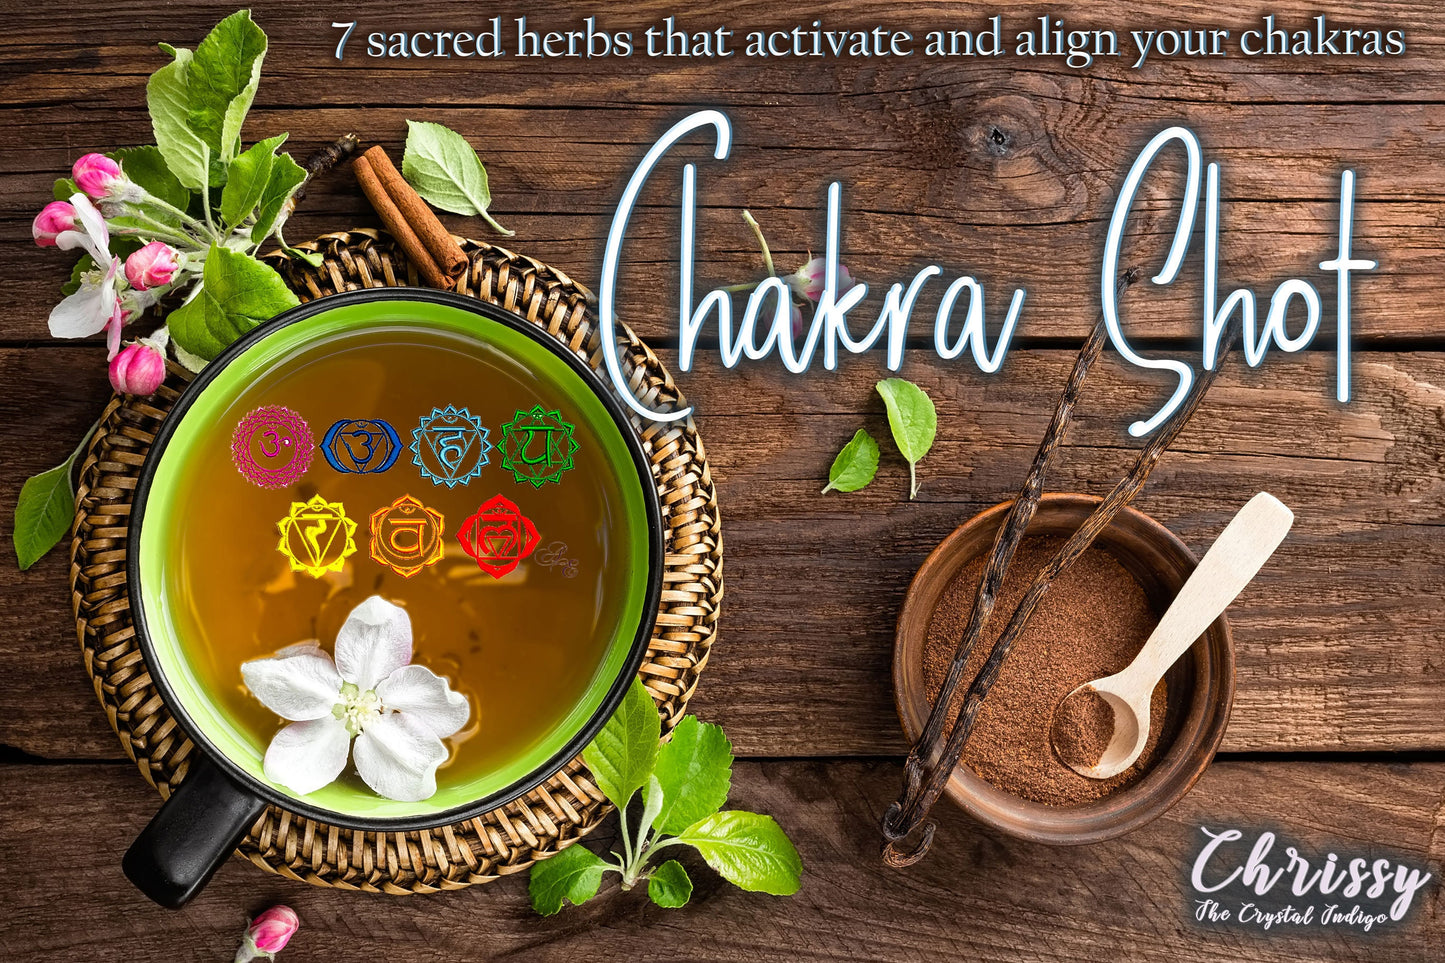 Chakra Shot (7 Sacred Herbs That Activate And Align Your Chakras) Tea